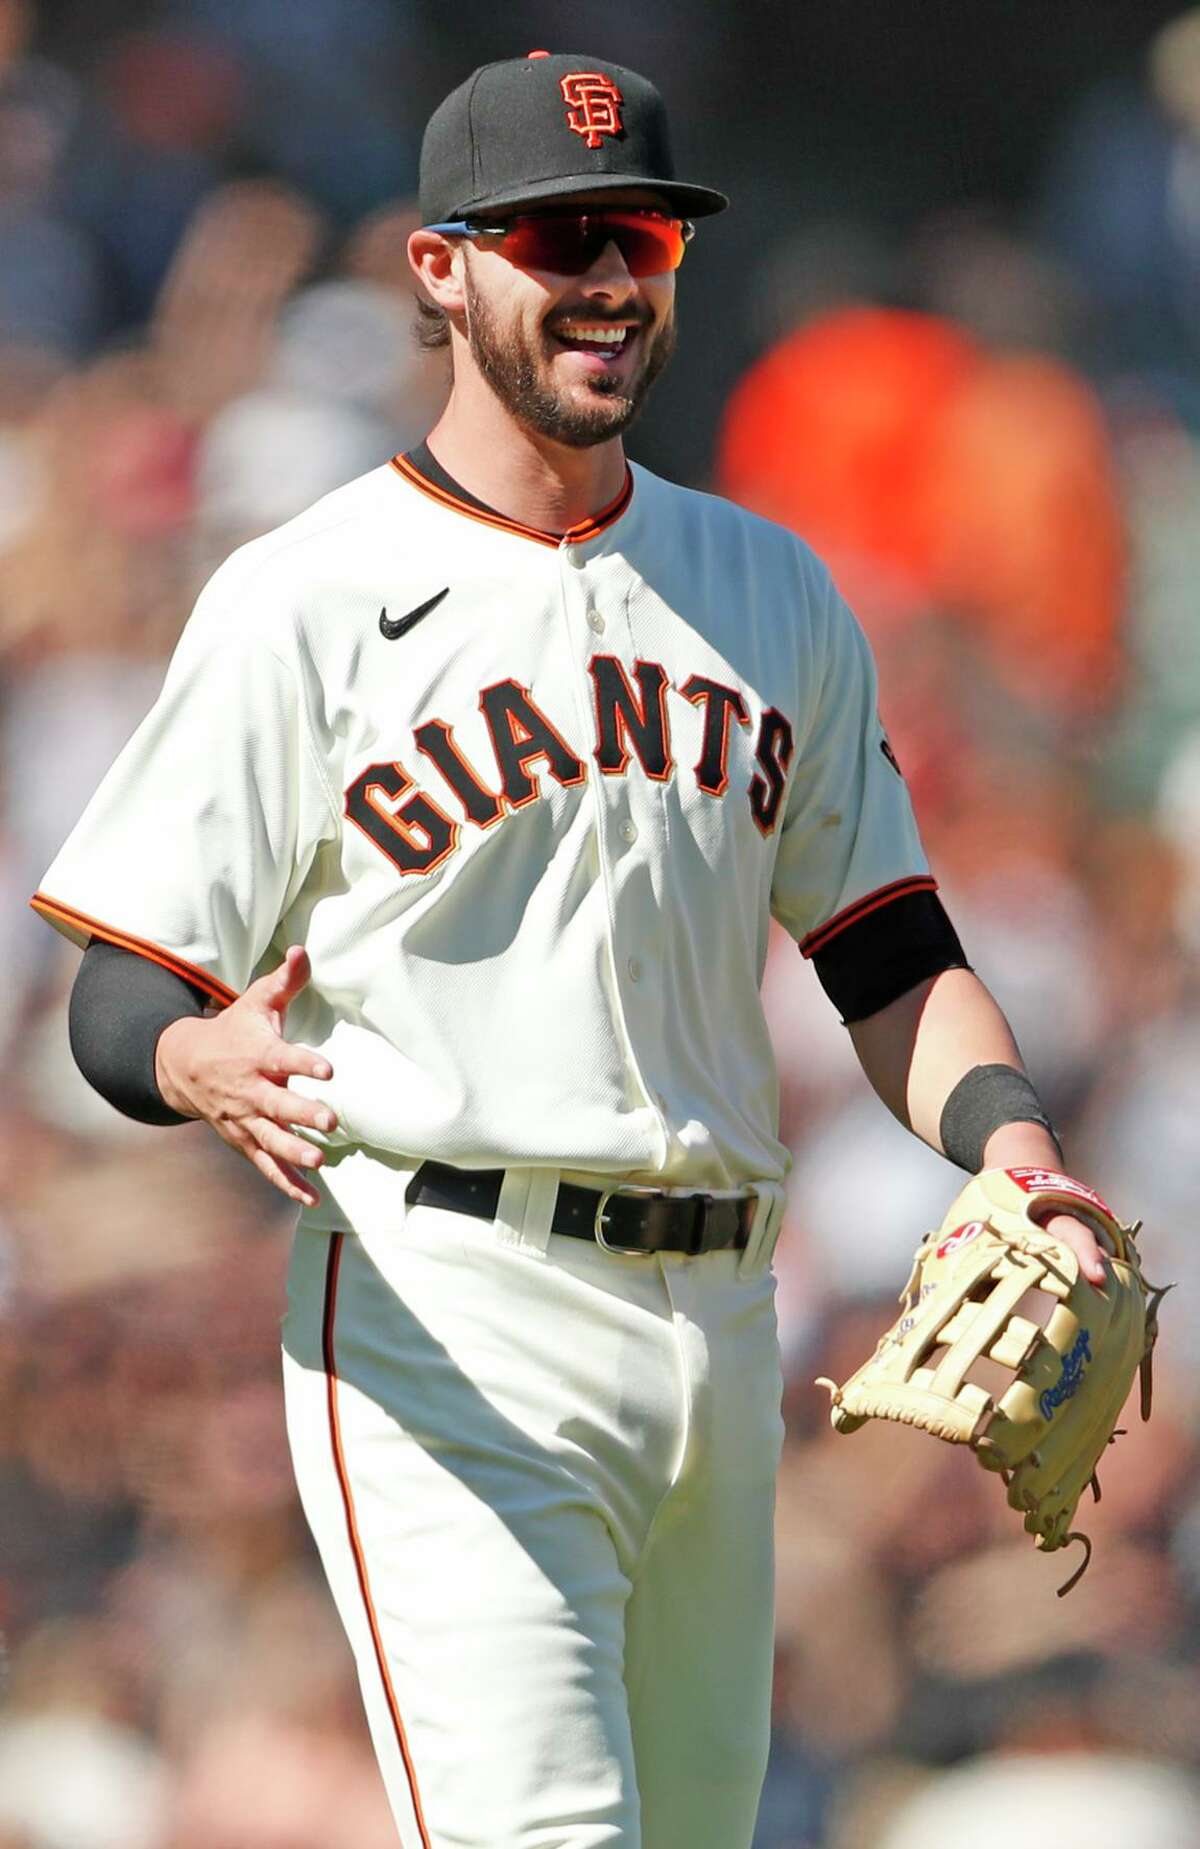 San Francisco Giants' Kris Bryant celebrates Giants' 5-3 win over Houston Astros in MLB game at Oracle Park in San Francisco, Calif., on Sunday, August 1, 2021.